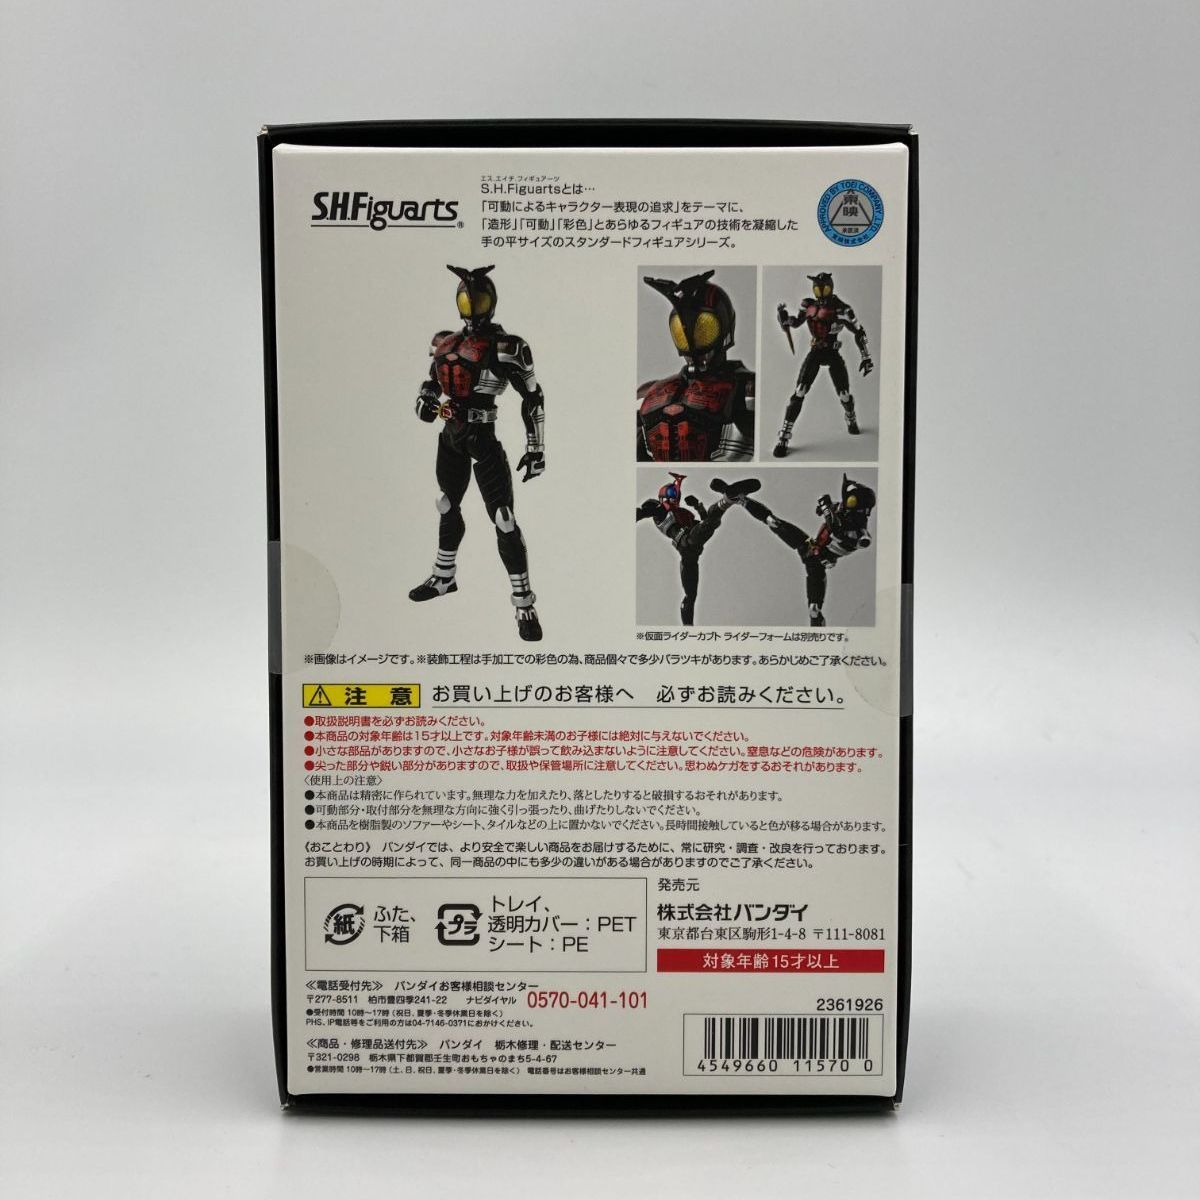 S.H.Figuarts仮面ライダーカブト ダークカブト 真骨彫製法 セット